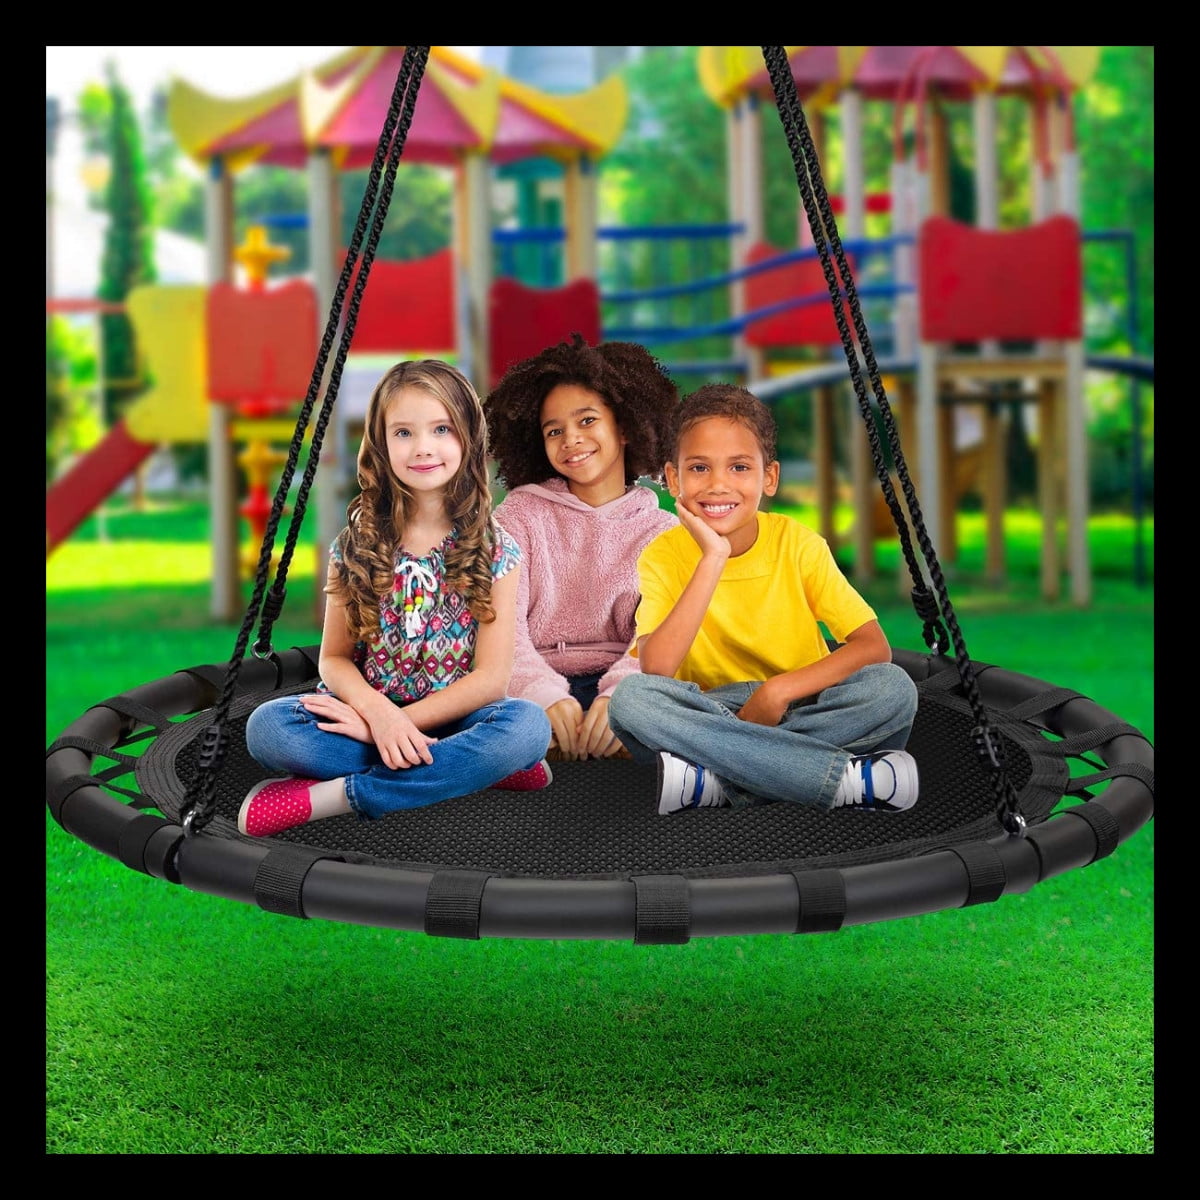 40" Flying Saucer Tree Swing Nest 700 lbs Children's Colorful Swing Easy Install 